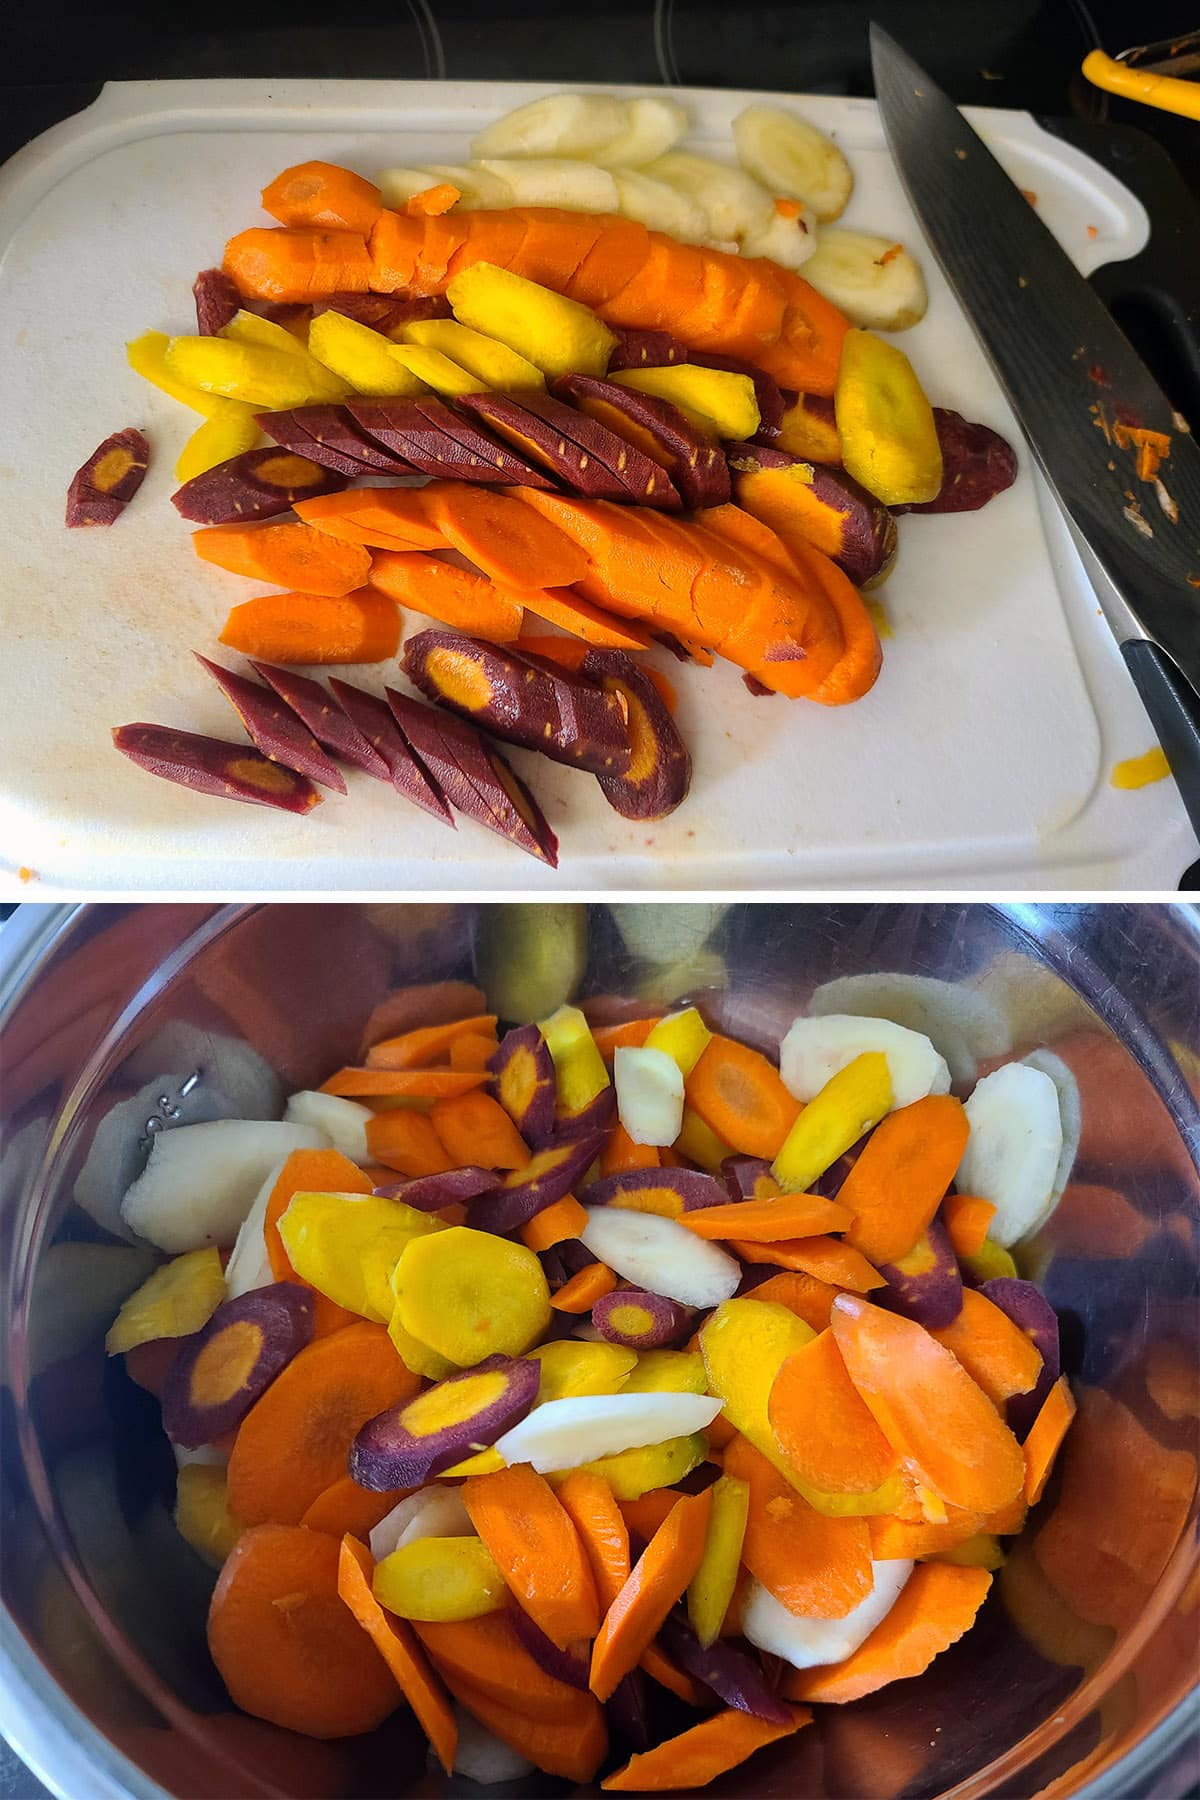 A 2 part image showing multii colored carrots being sliced.